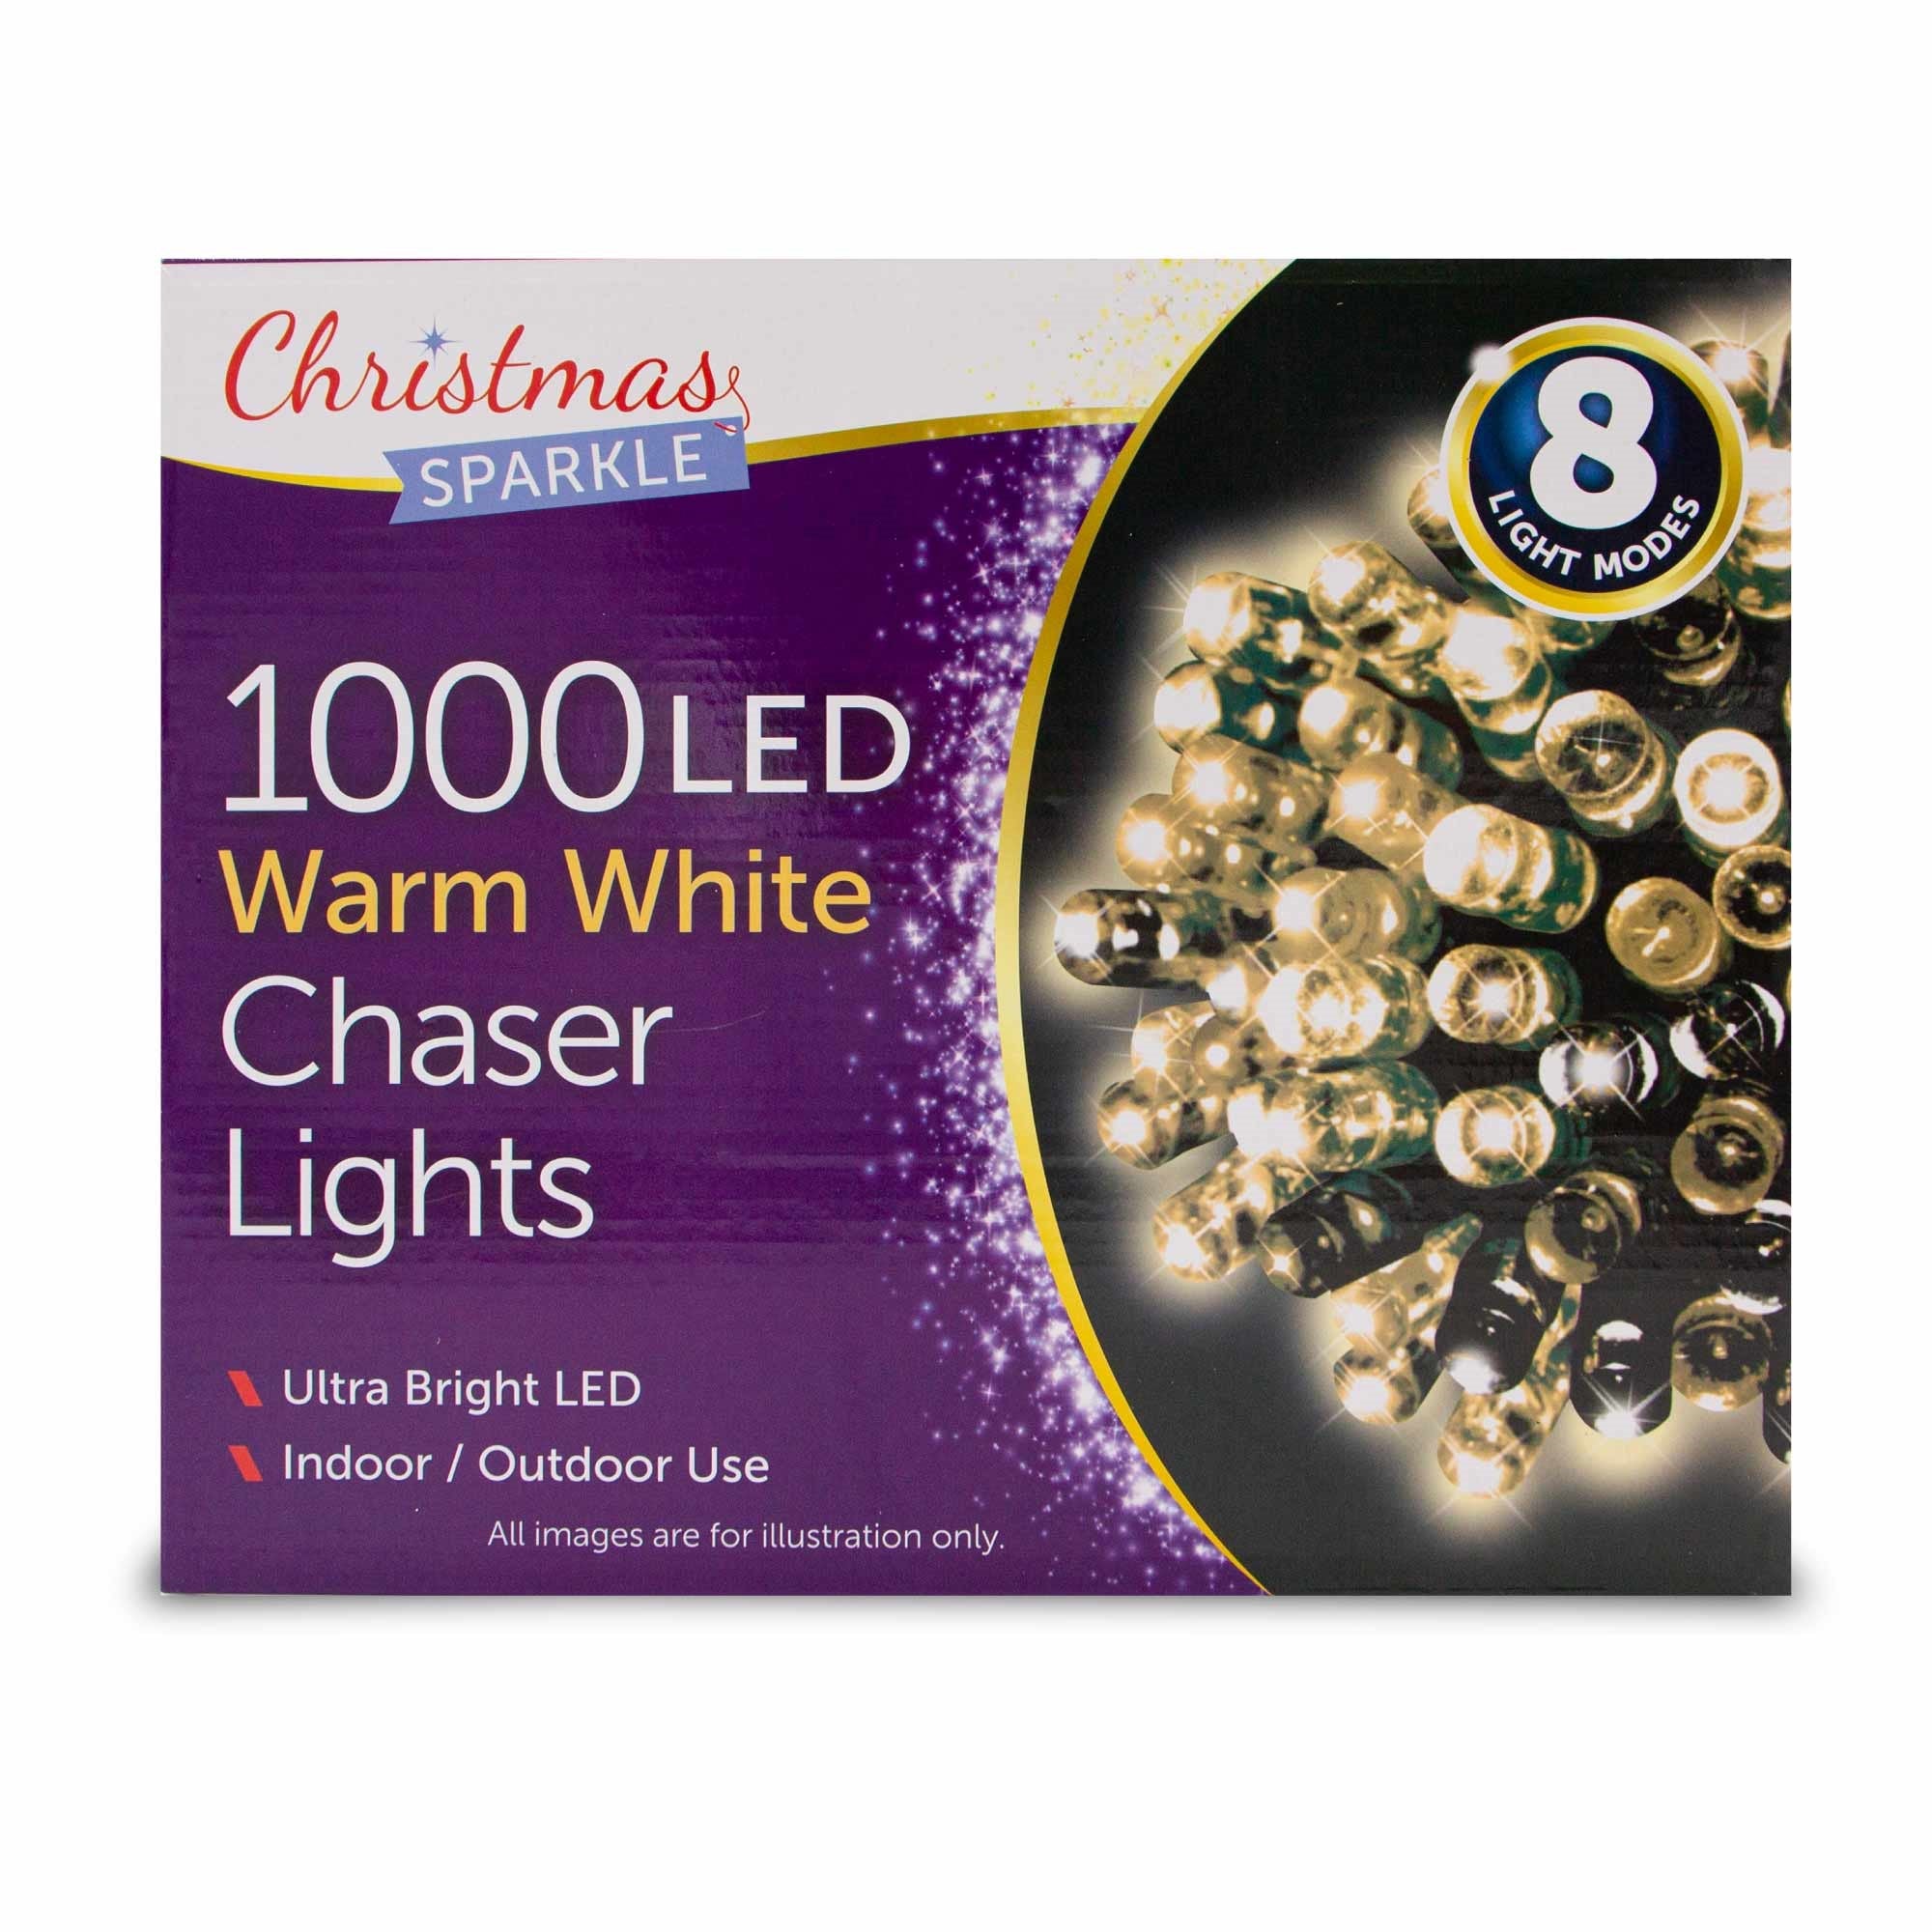 Christmas Sparkle Indoor and Outdoor Chaser Lights x 1000 Warm White LEDs - Mains Lights  | TJ Hughes